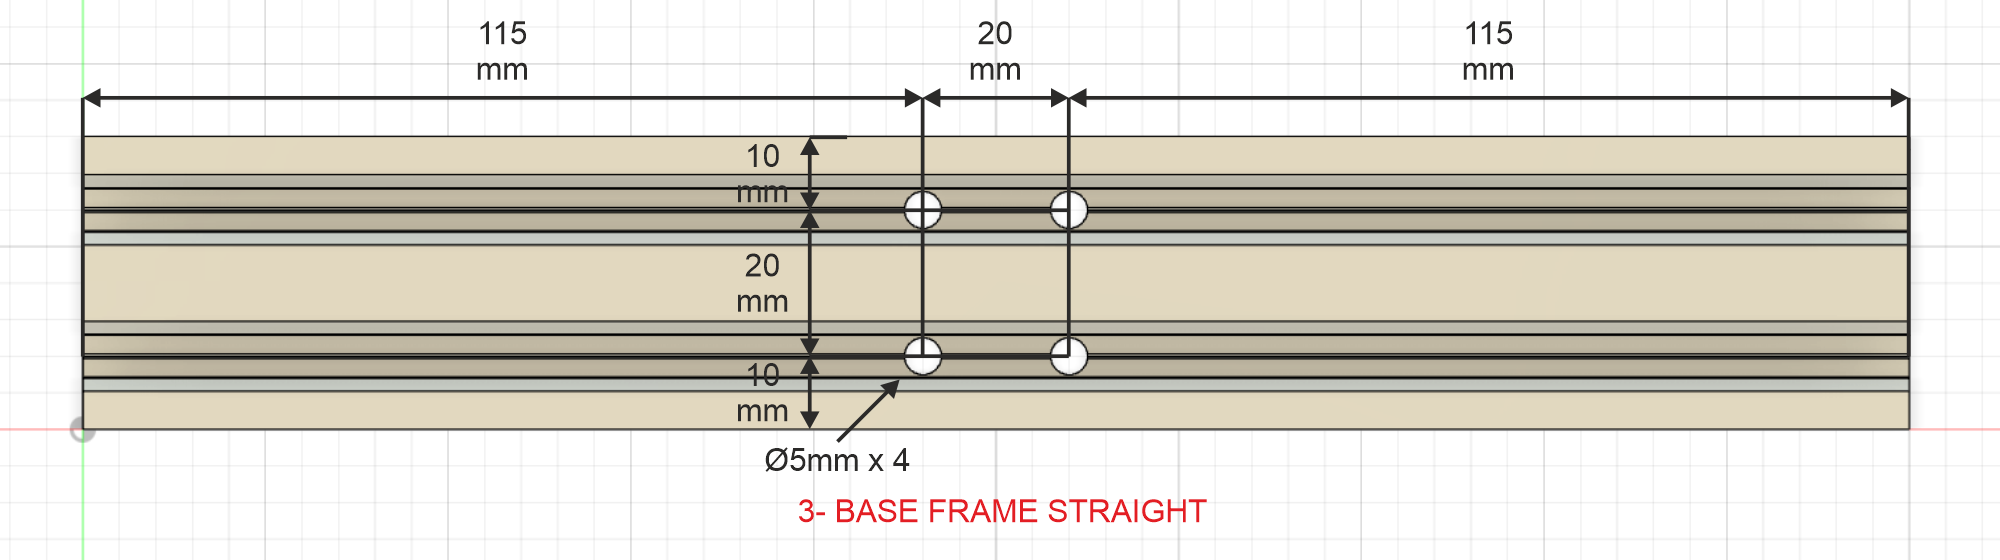 base frame straight picture